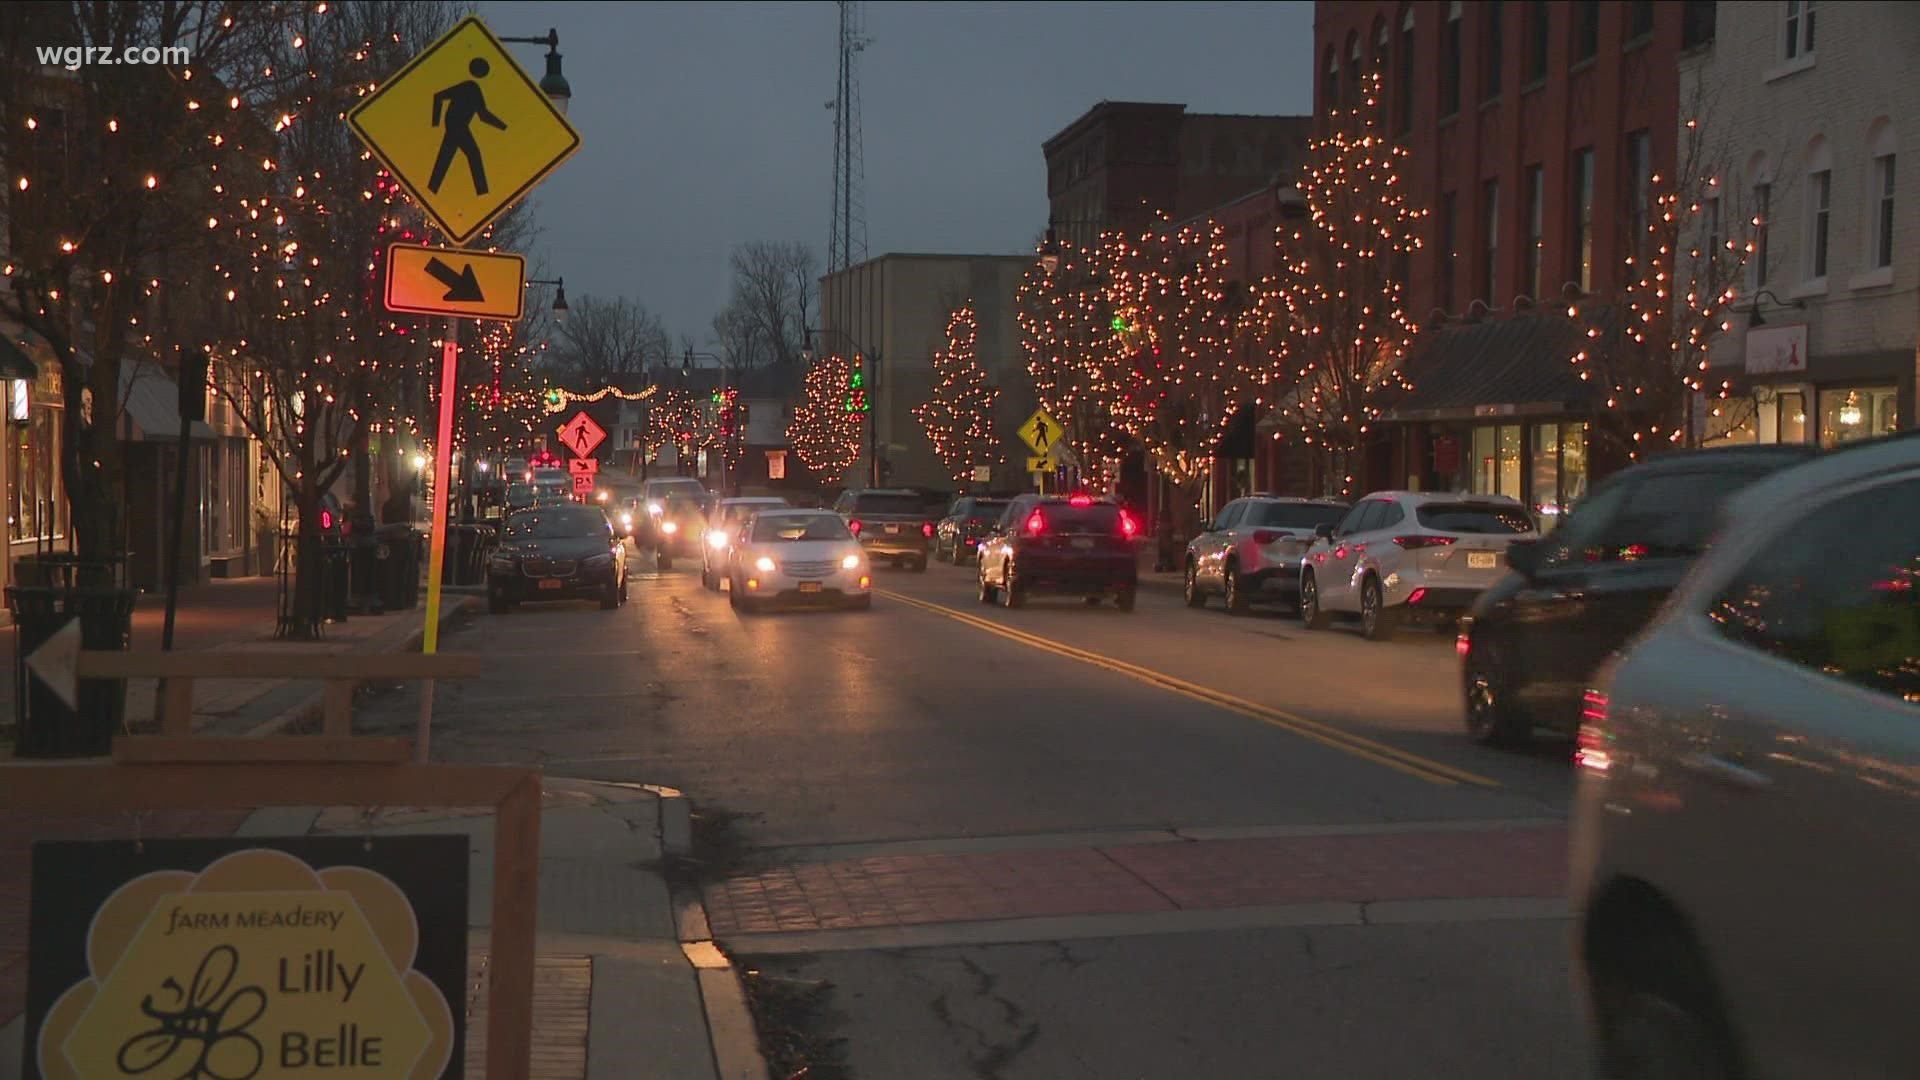 The village of Lancaster is bringing back its New Year's Eve celebrations after almost 2 years hiatus.